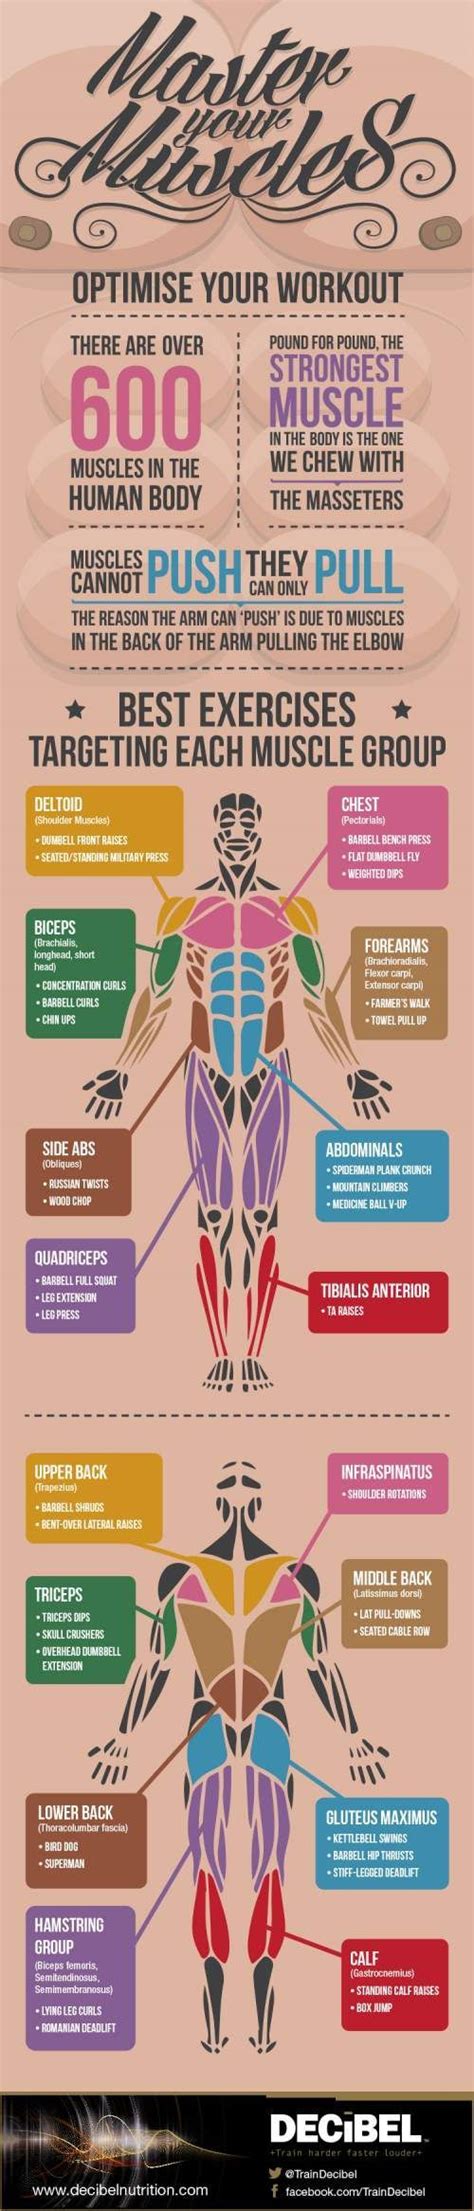 Best Exercises Targeting Each Muscle Group This Is About The Time